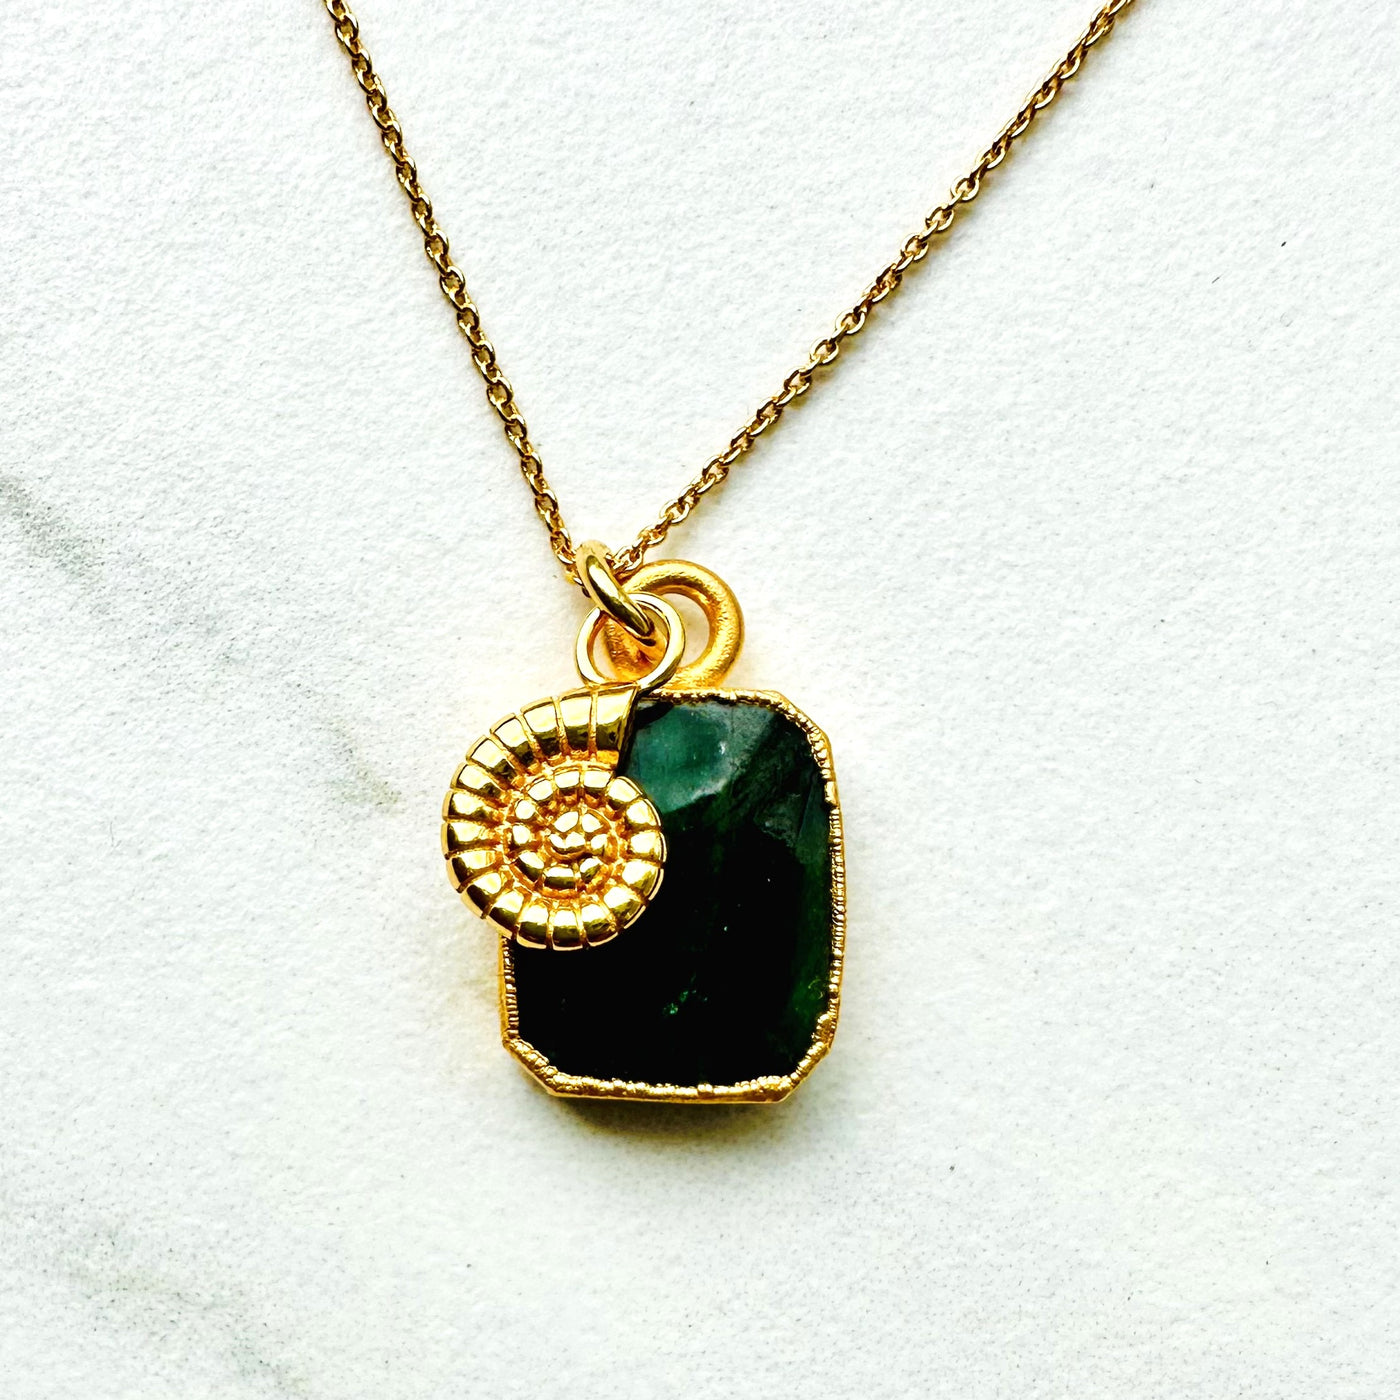 Gold plated emerald and ammonite charm pendant necklace